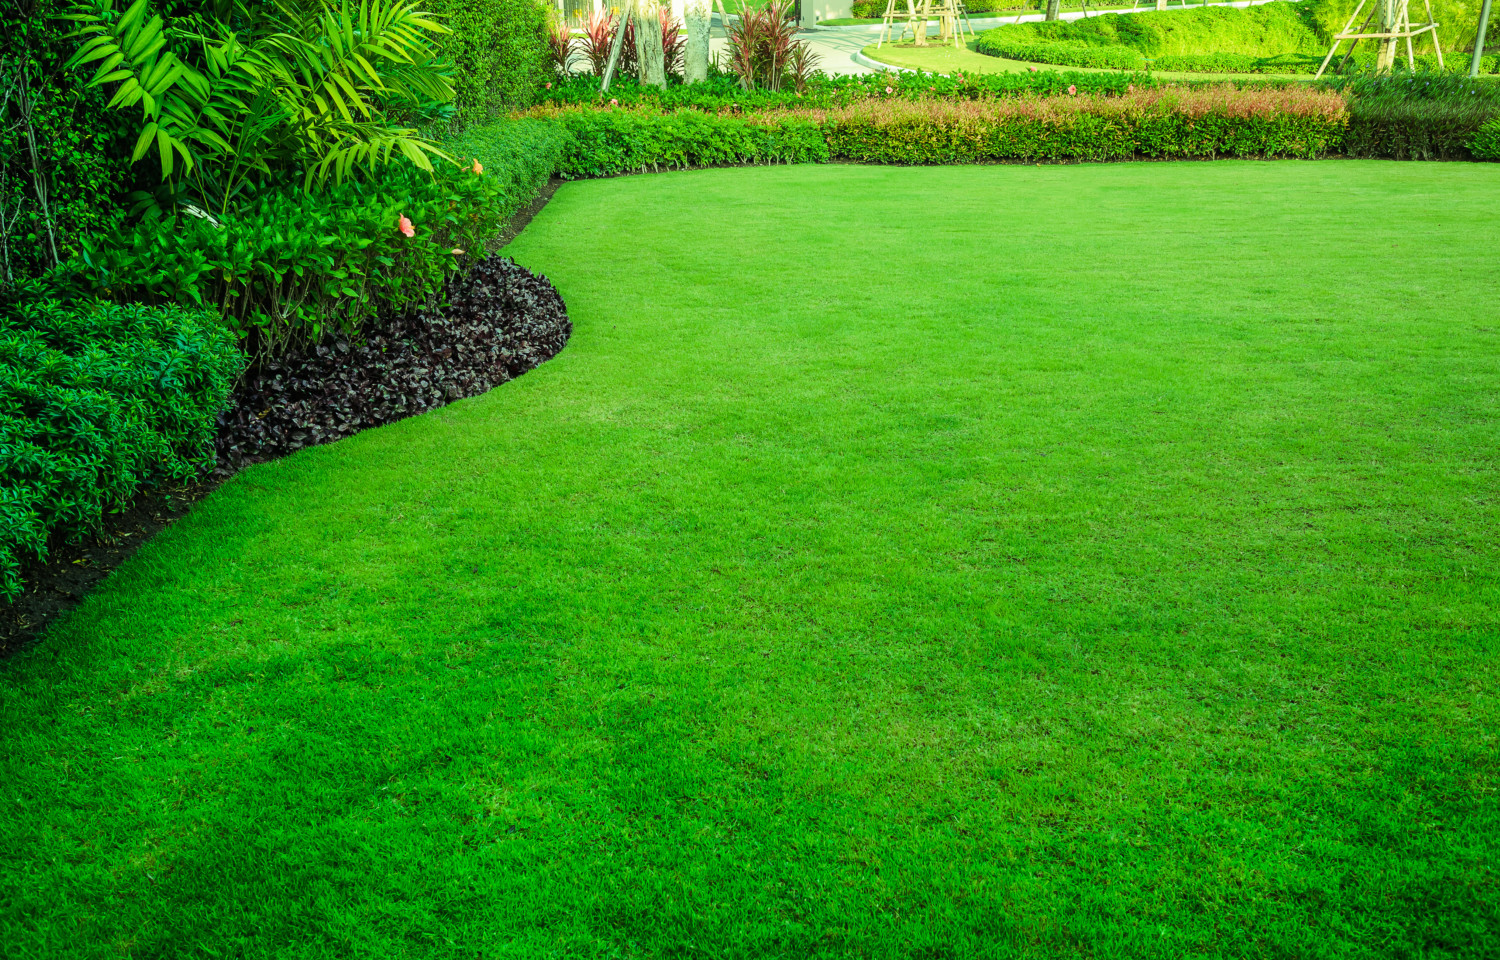 How To Make The Grass Green How To Make Grass Green And Lush - Simplemost